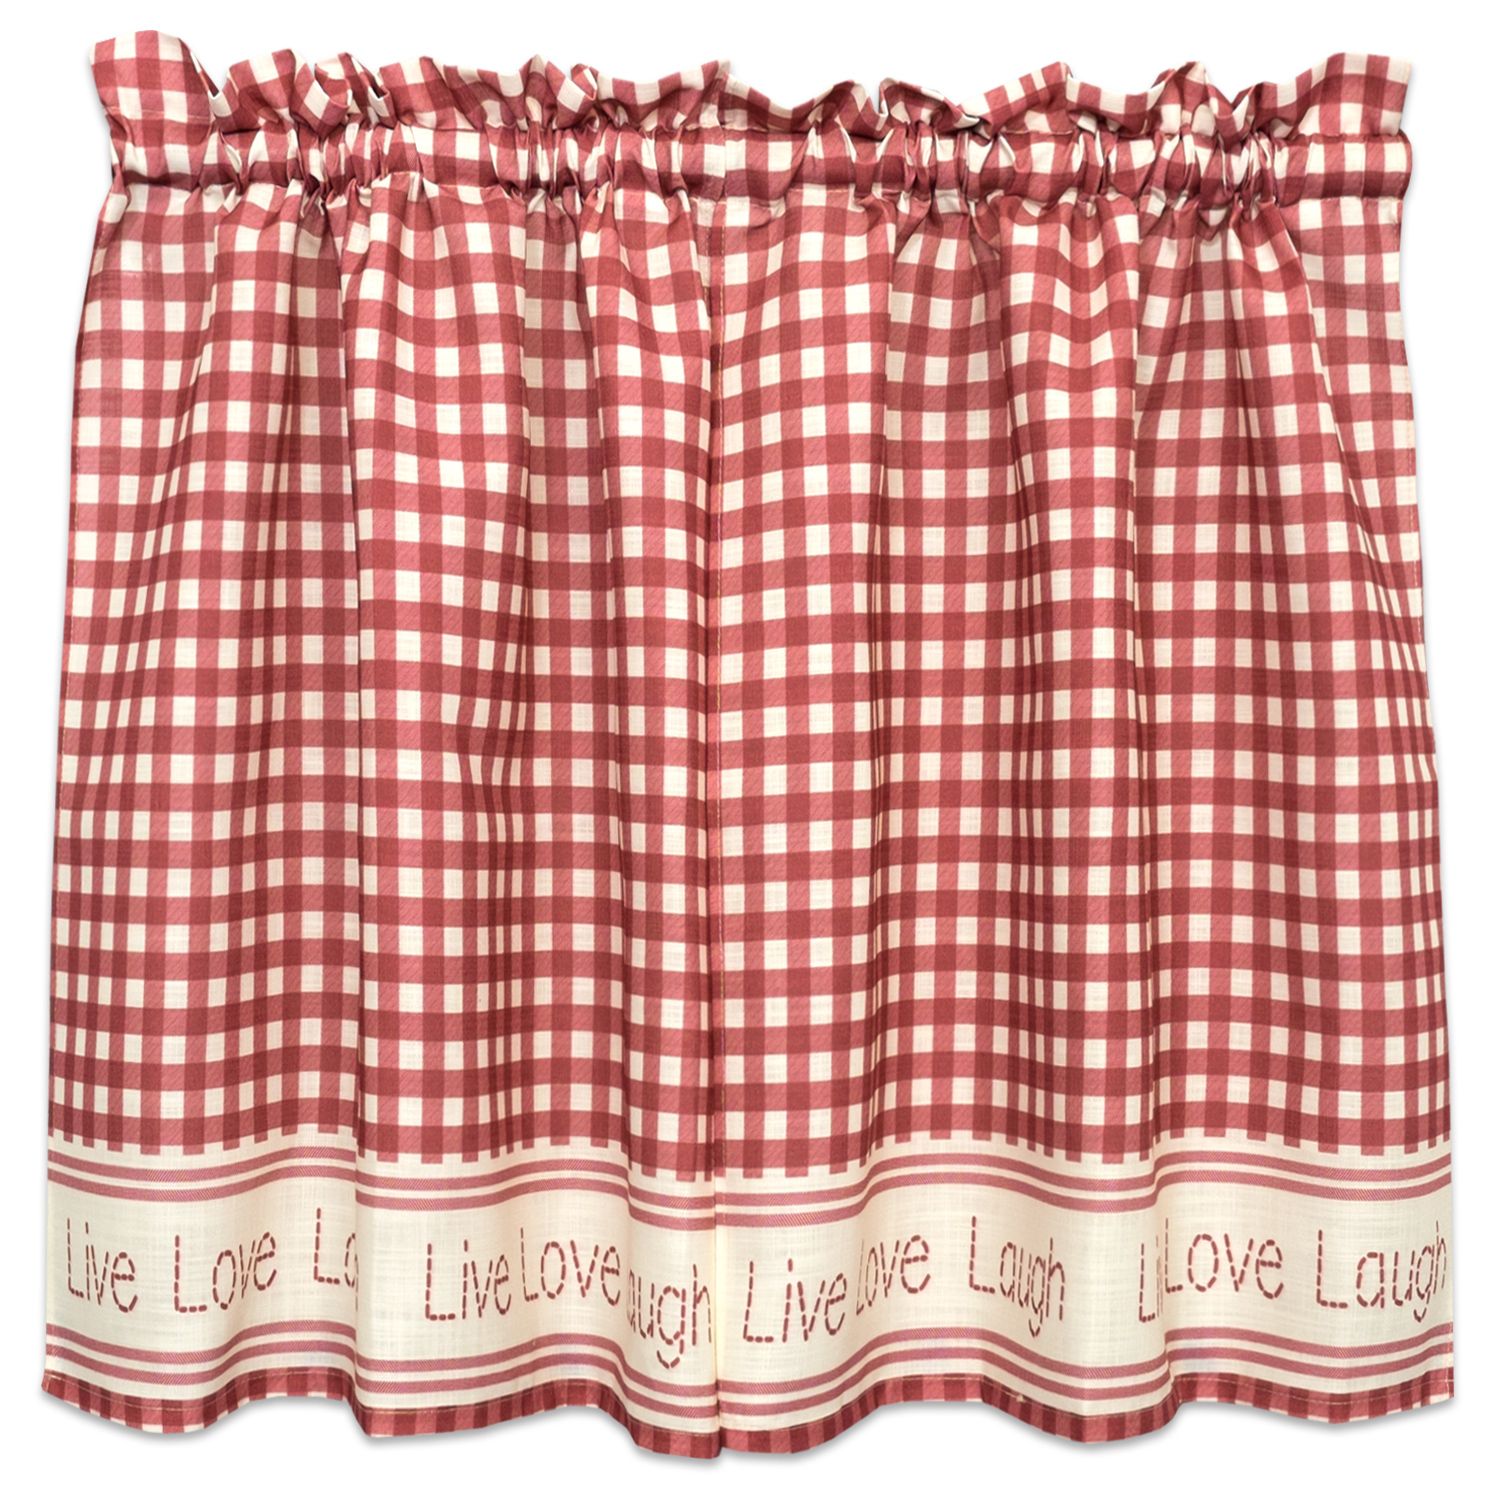 Gingham Stitch Live Laugh Love Kitchen Curtain Tier Pair Or Valance Red Throughout Live, Love, Laugh Window Curtain Tier Pair And Valance Sets (View 10 of 20)